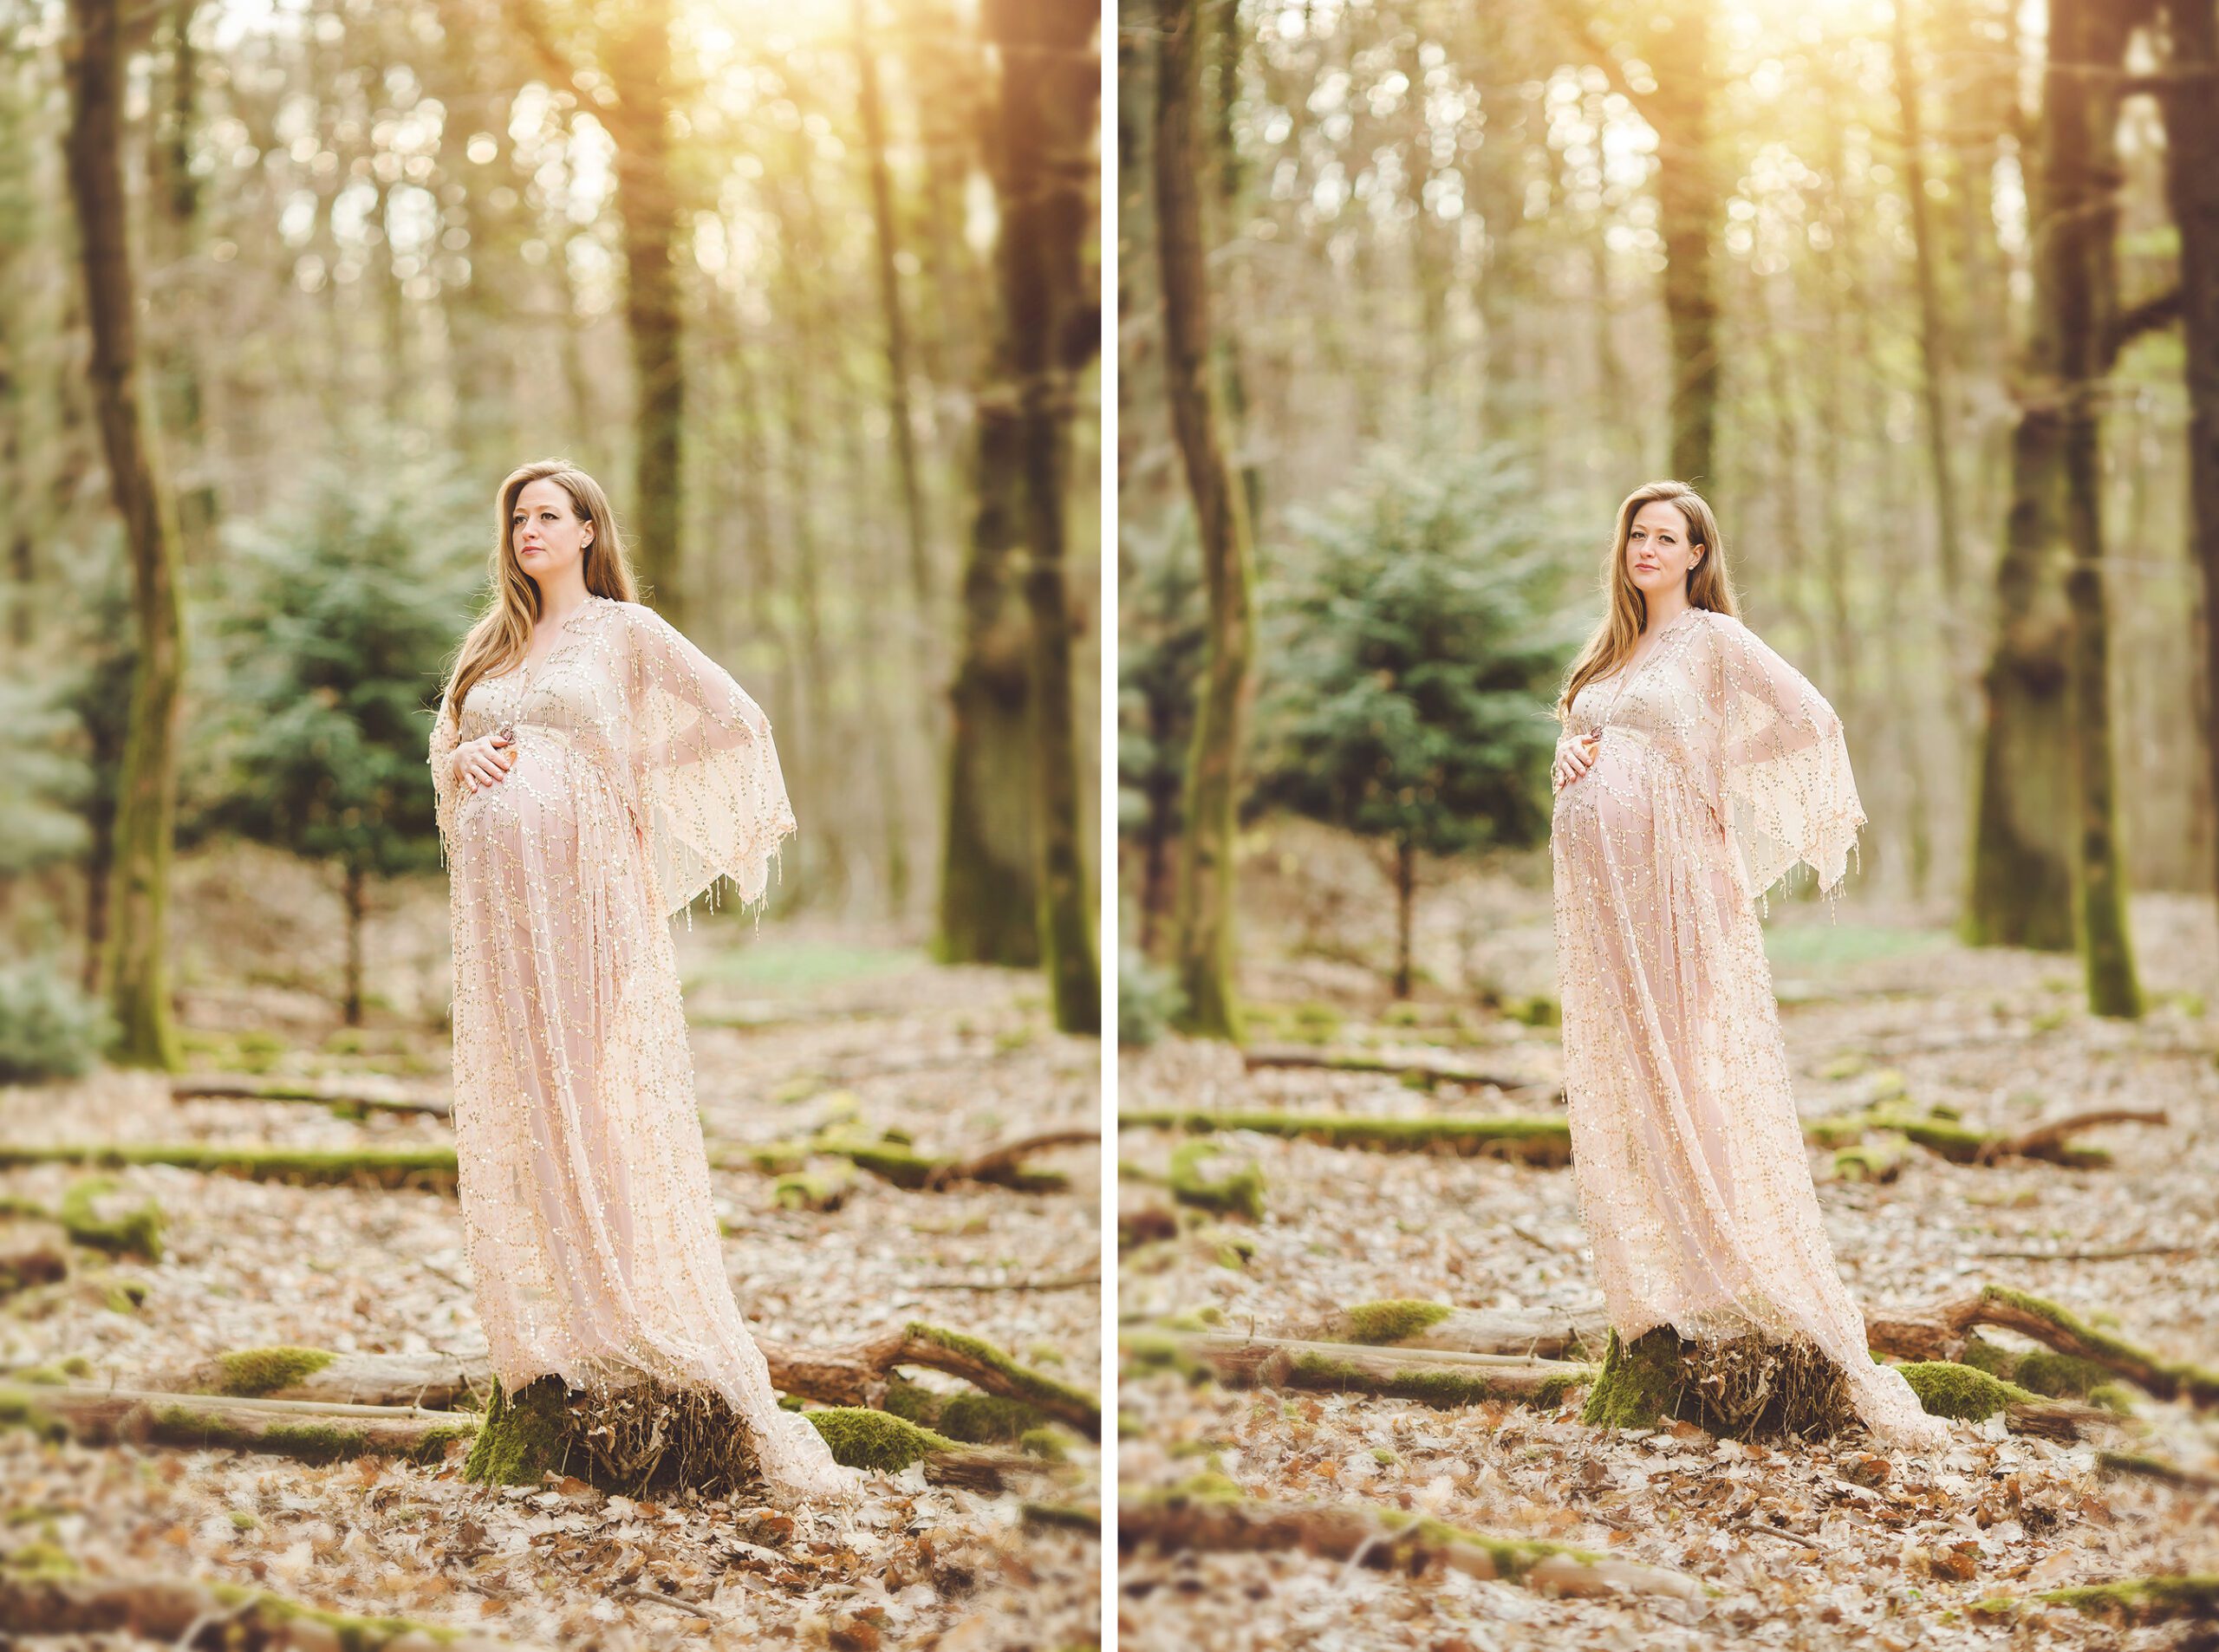 A maternity session in the forest by Frankfurt maternity photographer